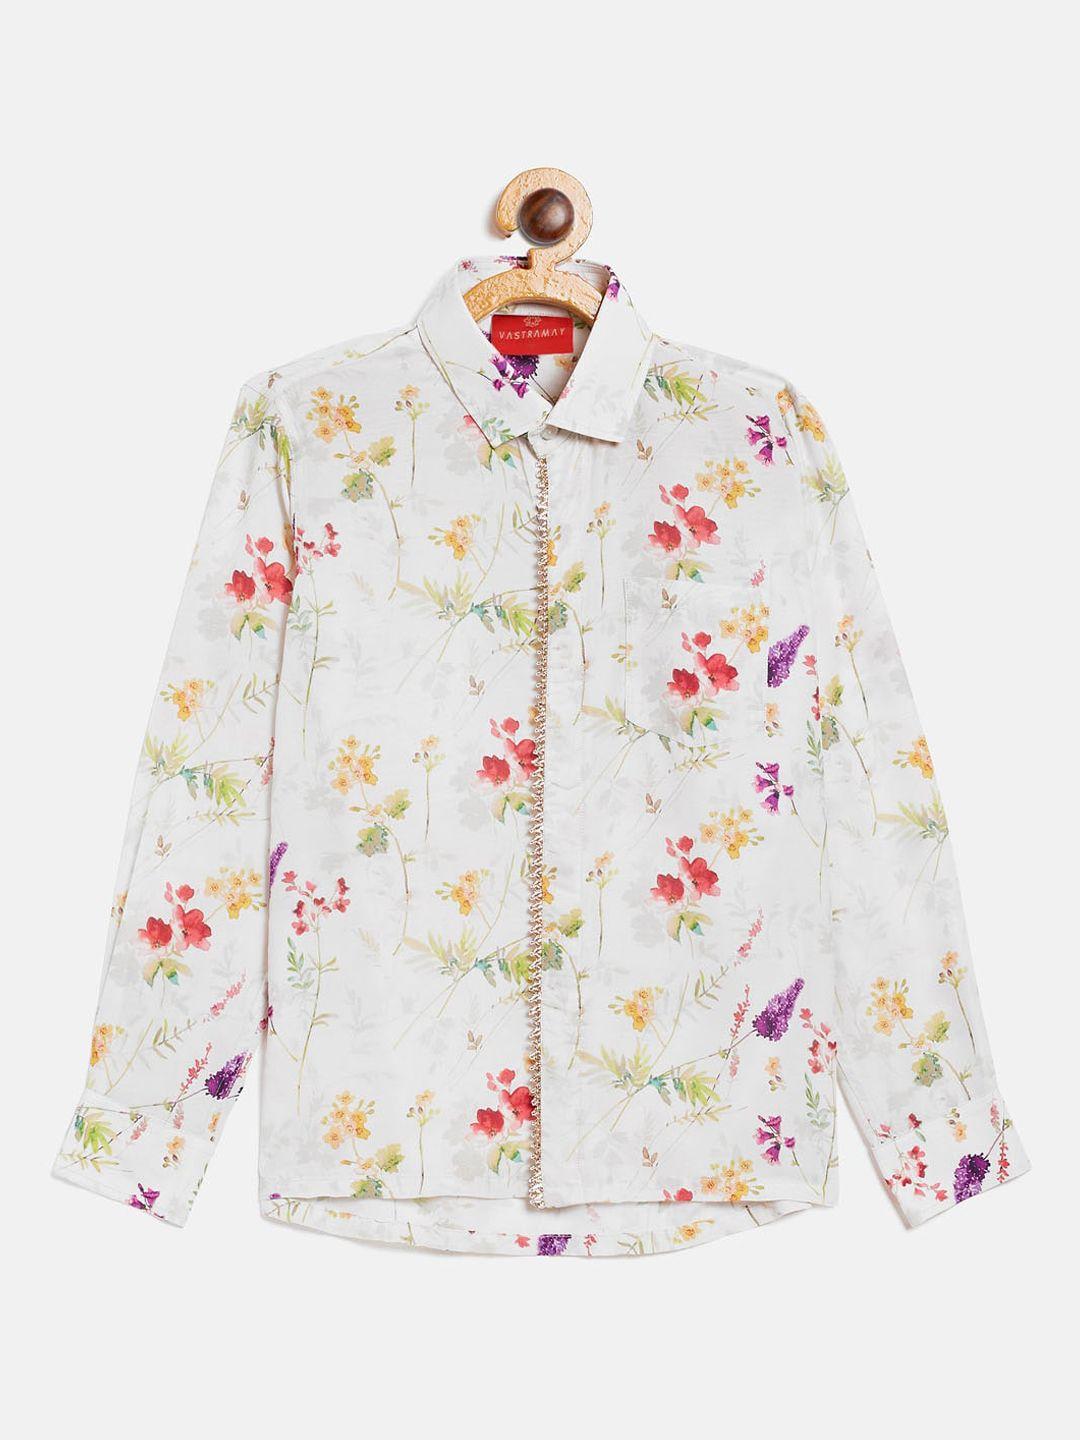 vastramay-boys-cream-coloured-&-red-floral-opaque-printed-shirt